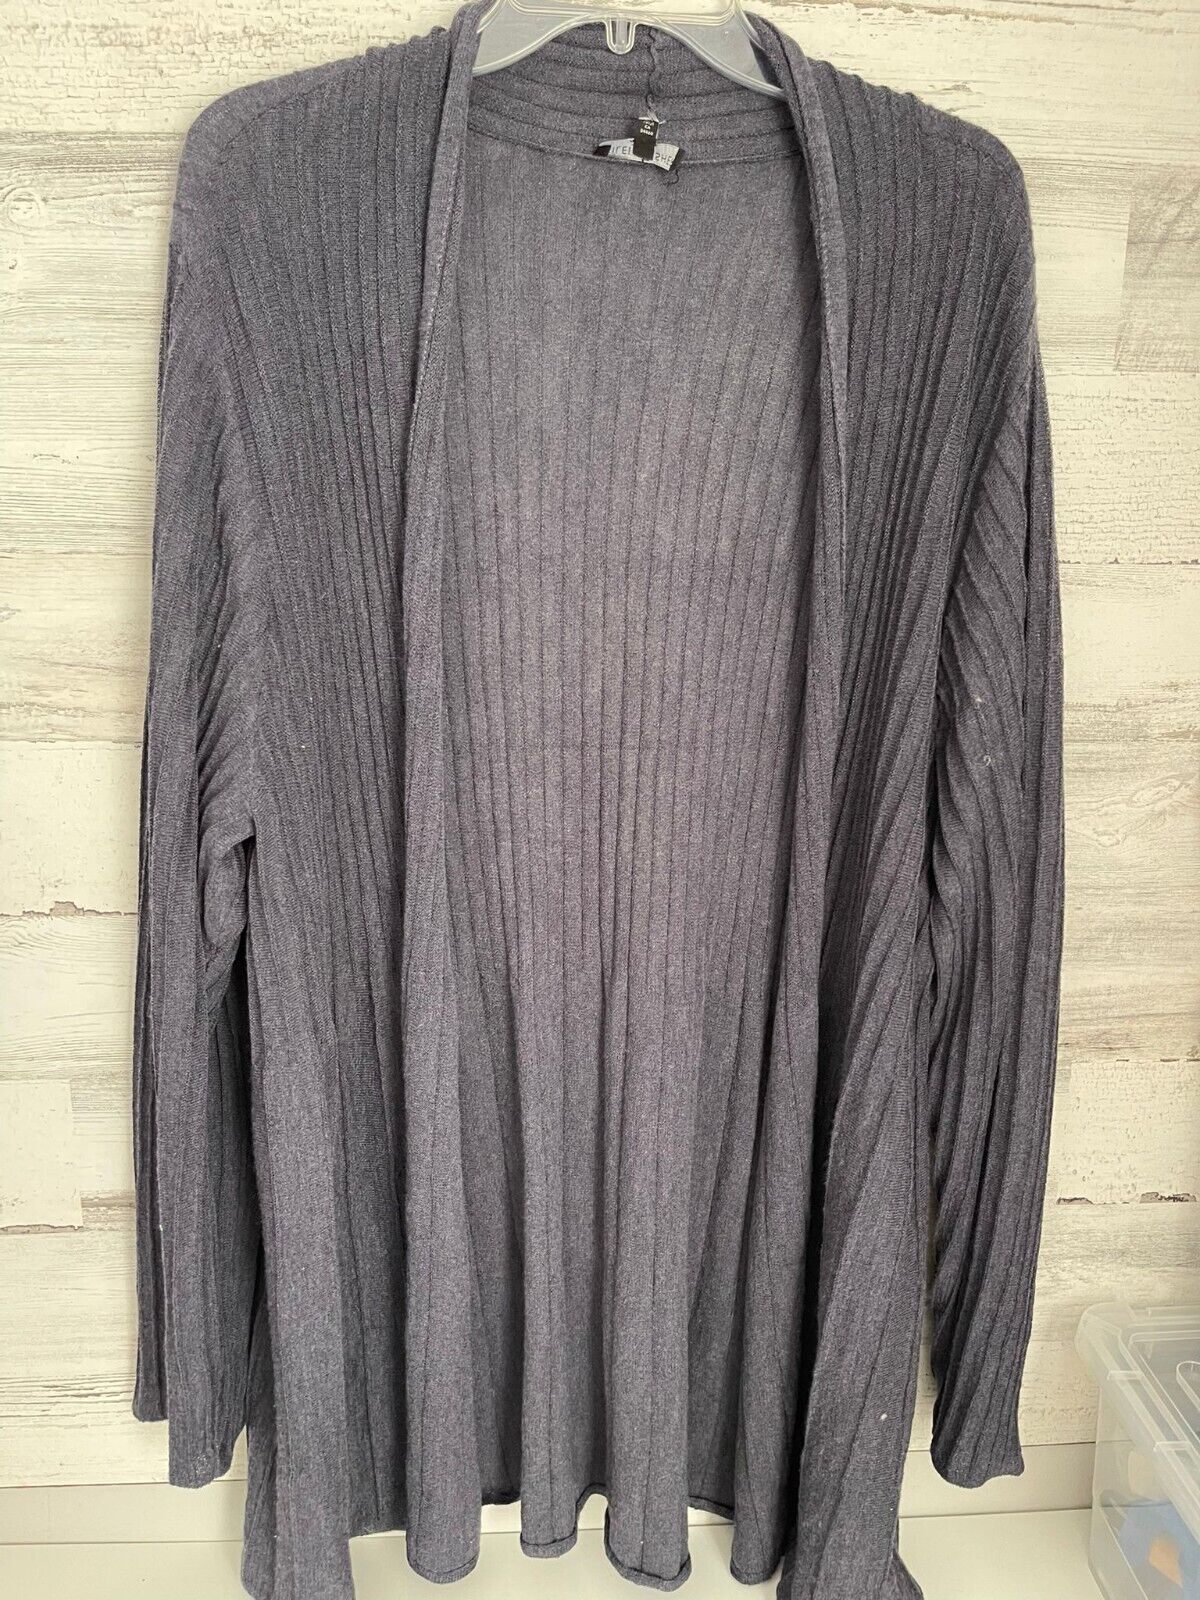 Primary image for Eileen Fisher Cardigan Women's Blue 100% Wool Ribbed Open Front Long Sleeve 2X